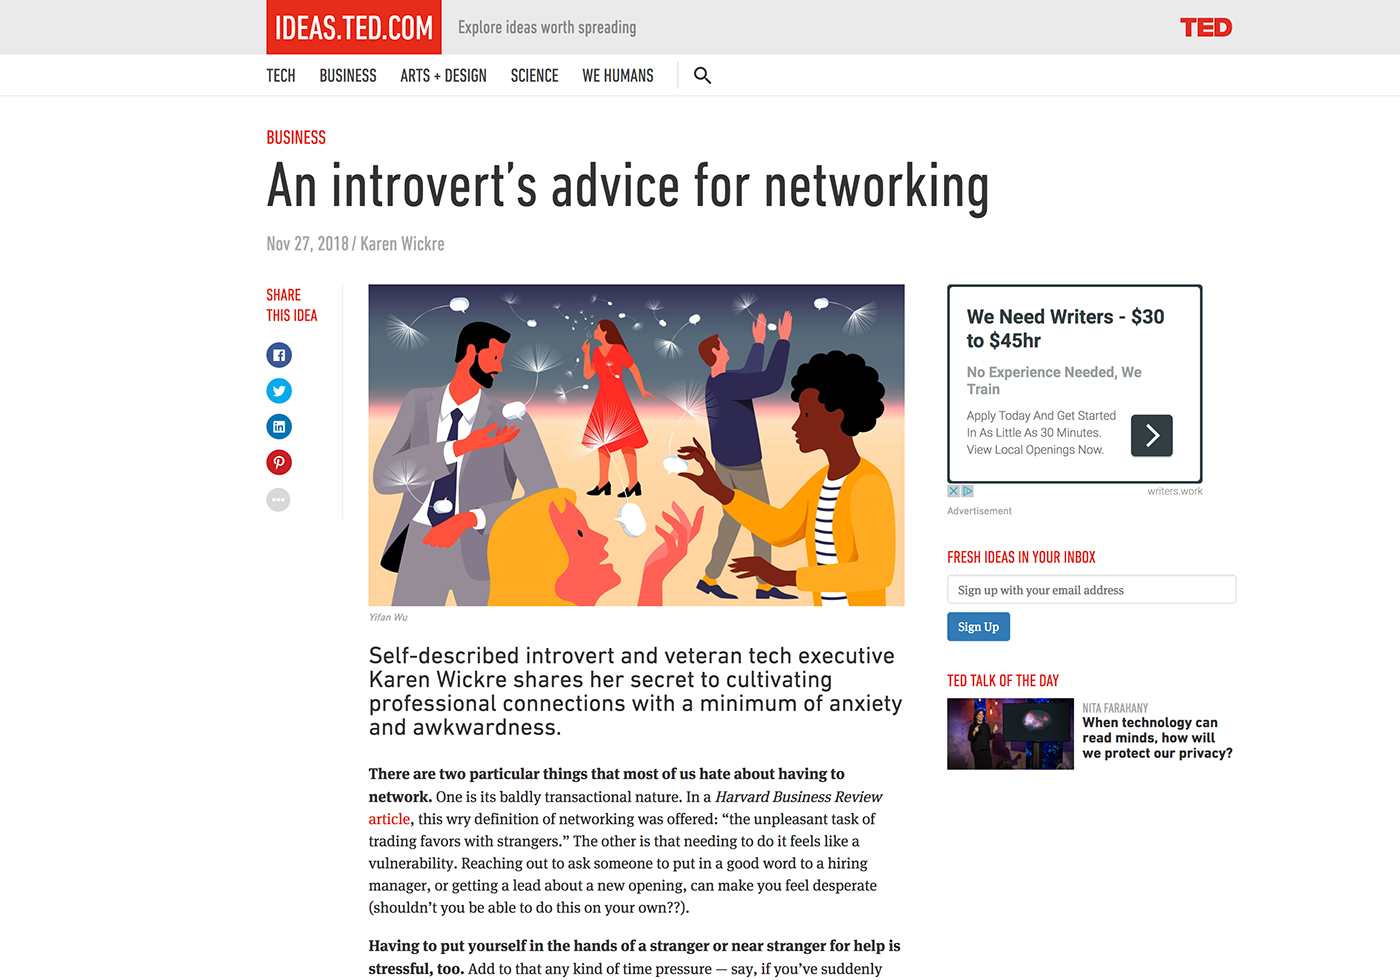 editorial TED creativeart conceptual art networking Introvert graphic